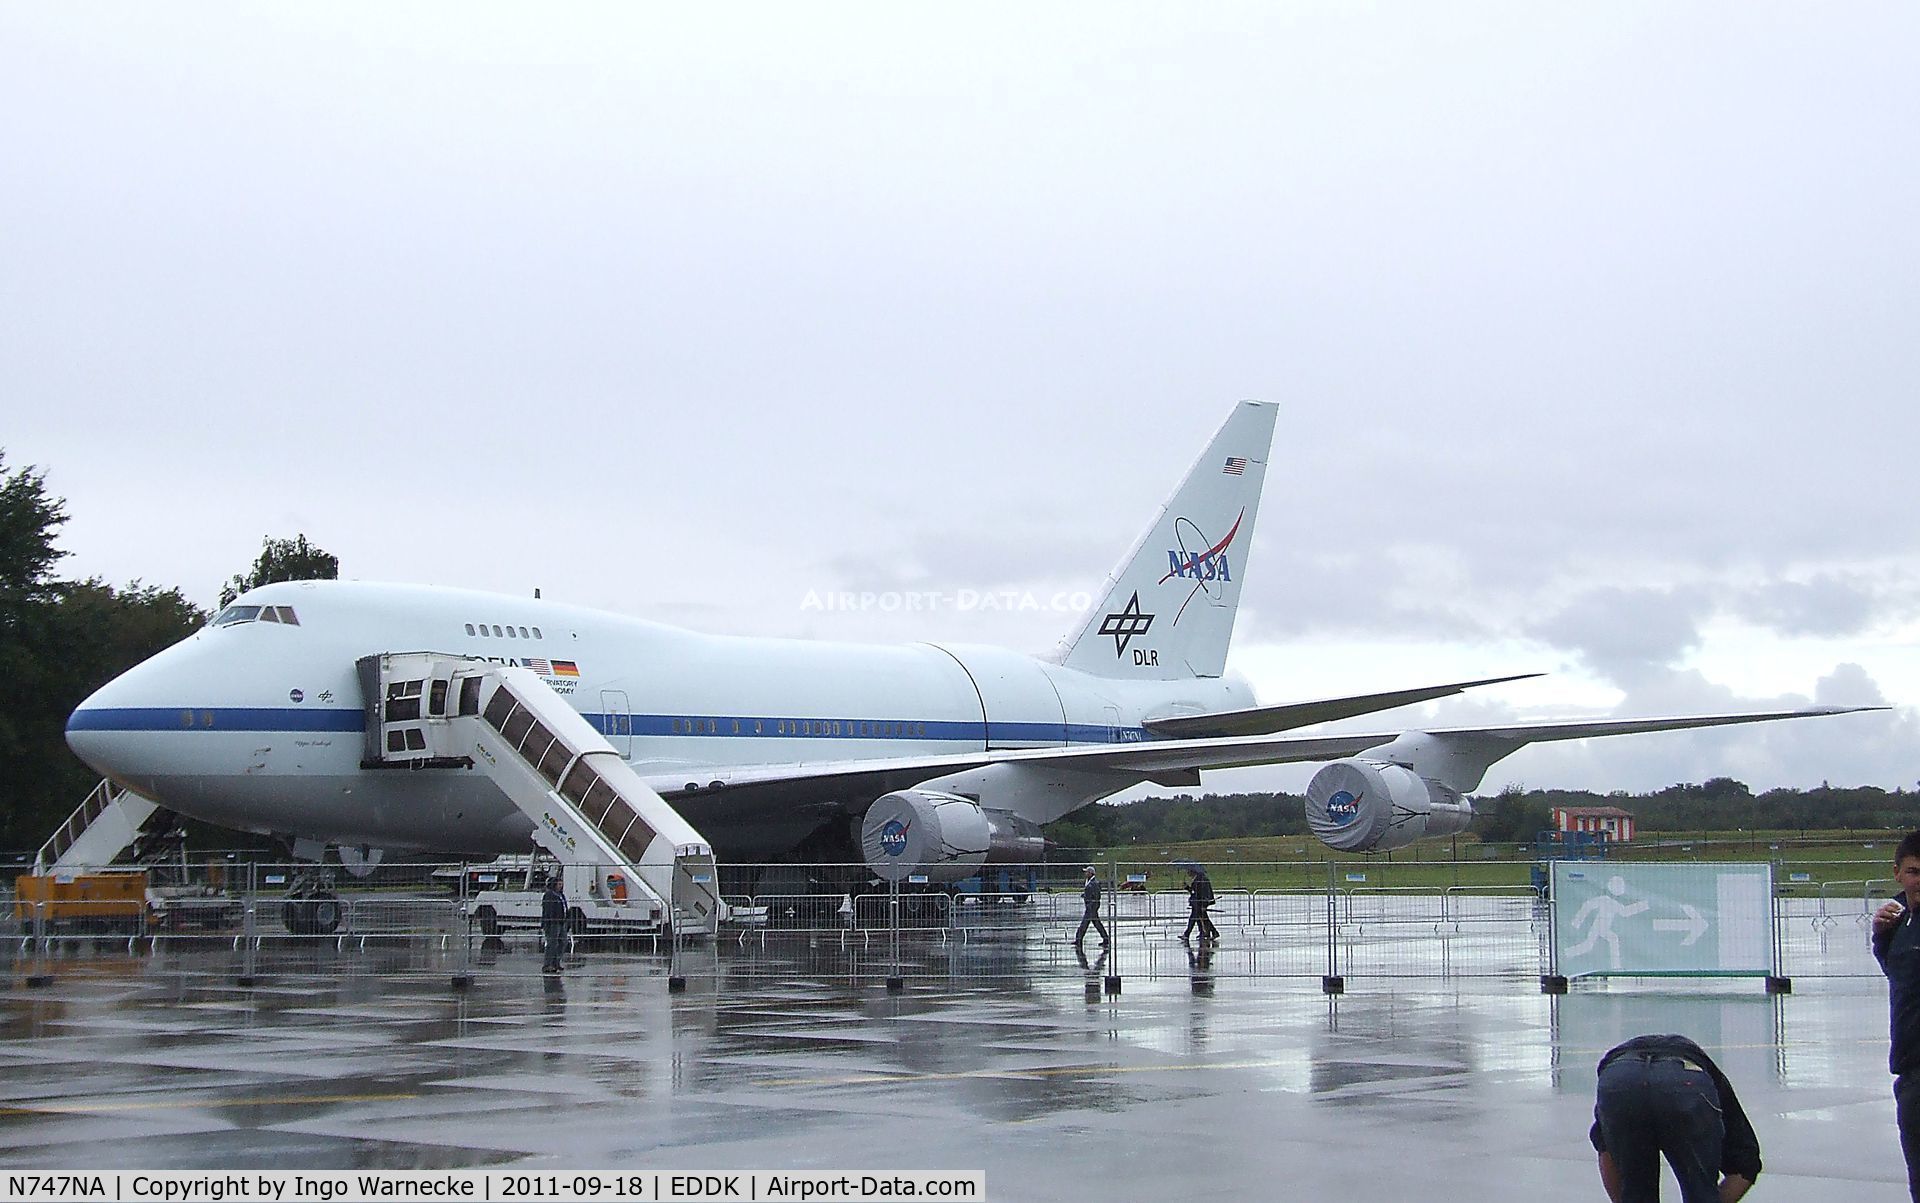 N747NA, 1977 Boeing 747SP-21 C/N 21441, Boeing / NASA / DLR 747SP-21 SOFIA flying observatory research aircraft at the DLR 2011 air and space day on the side of Cologne airport